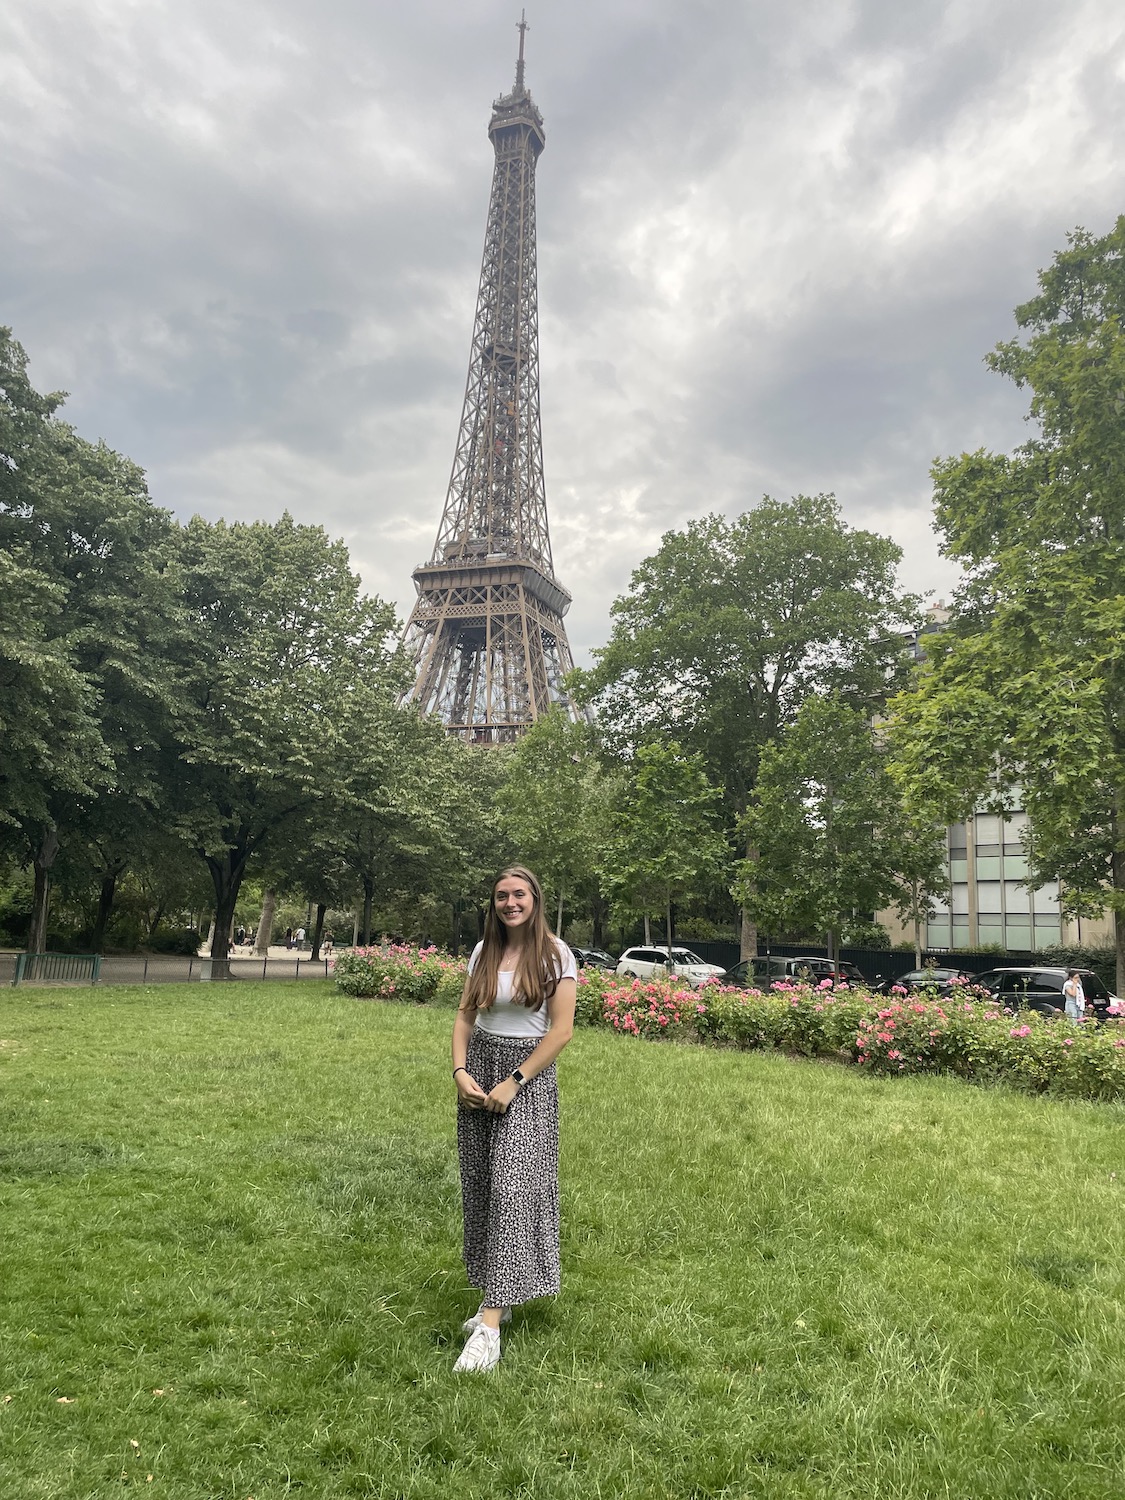 Marietta College student Kaylie Ward ’24 poses for a photo in front of the Eiffel Tower during her Education Abroad trip